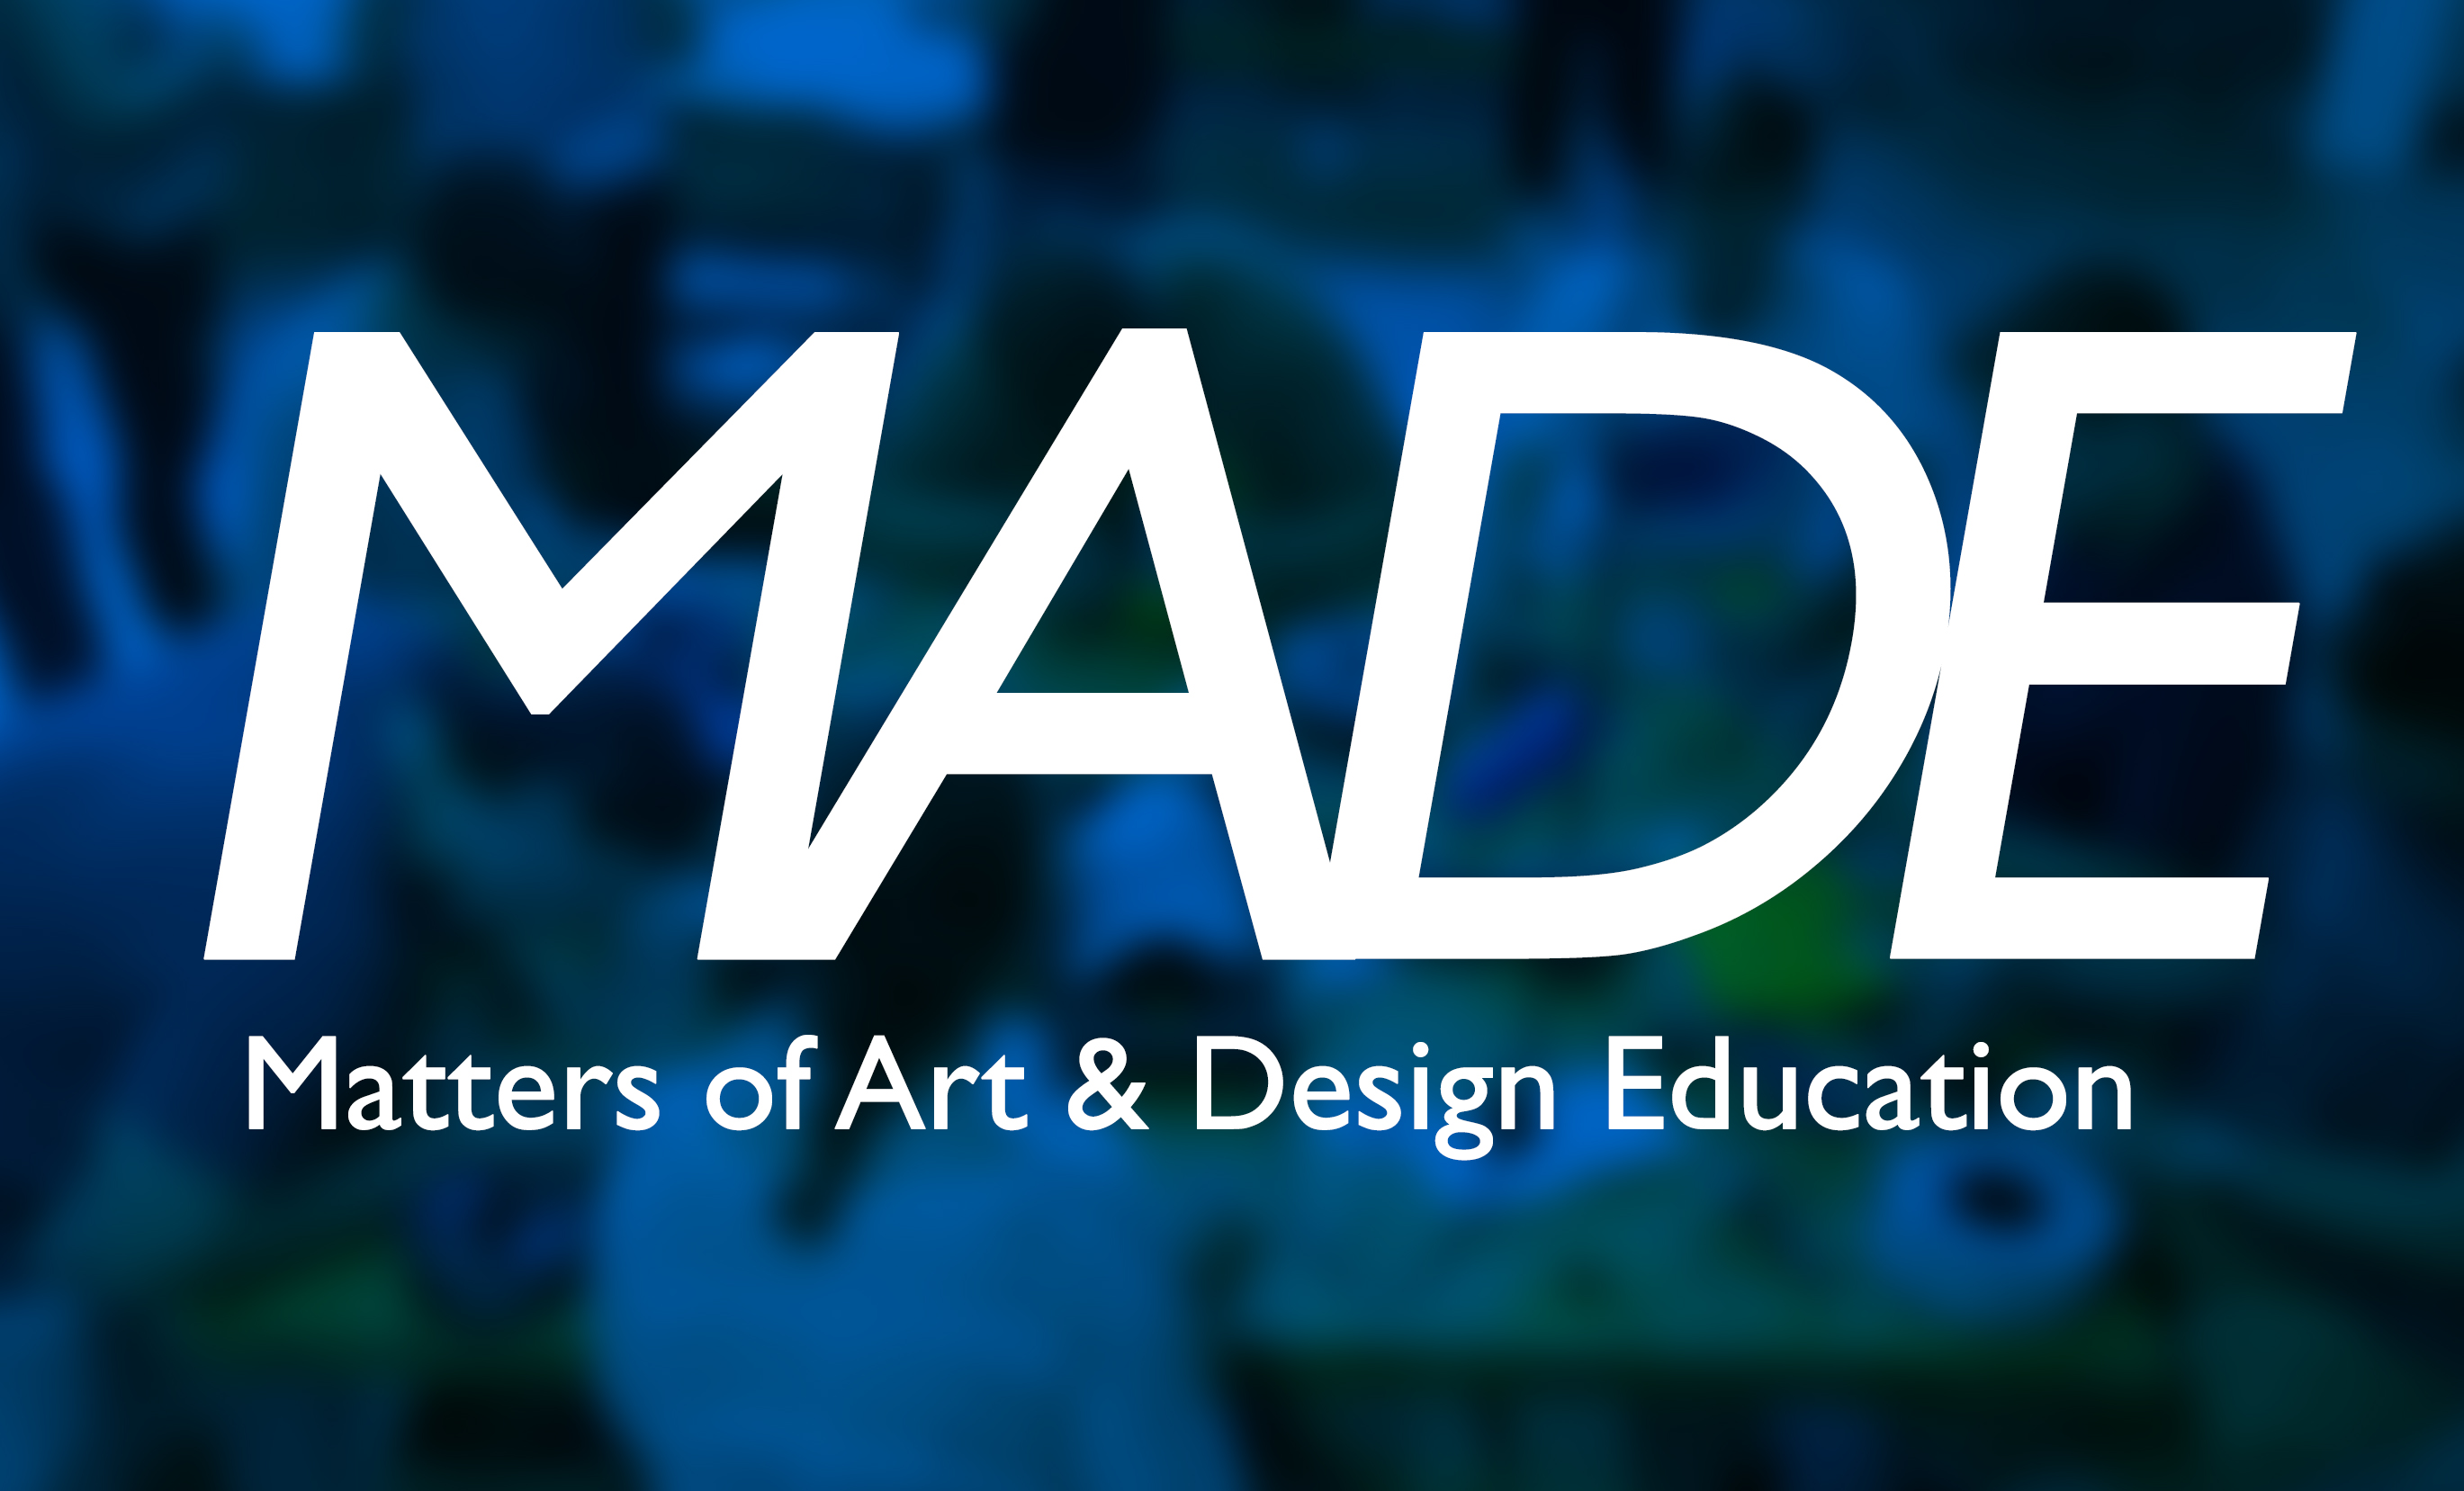 Matters of Art and Design Education Logo